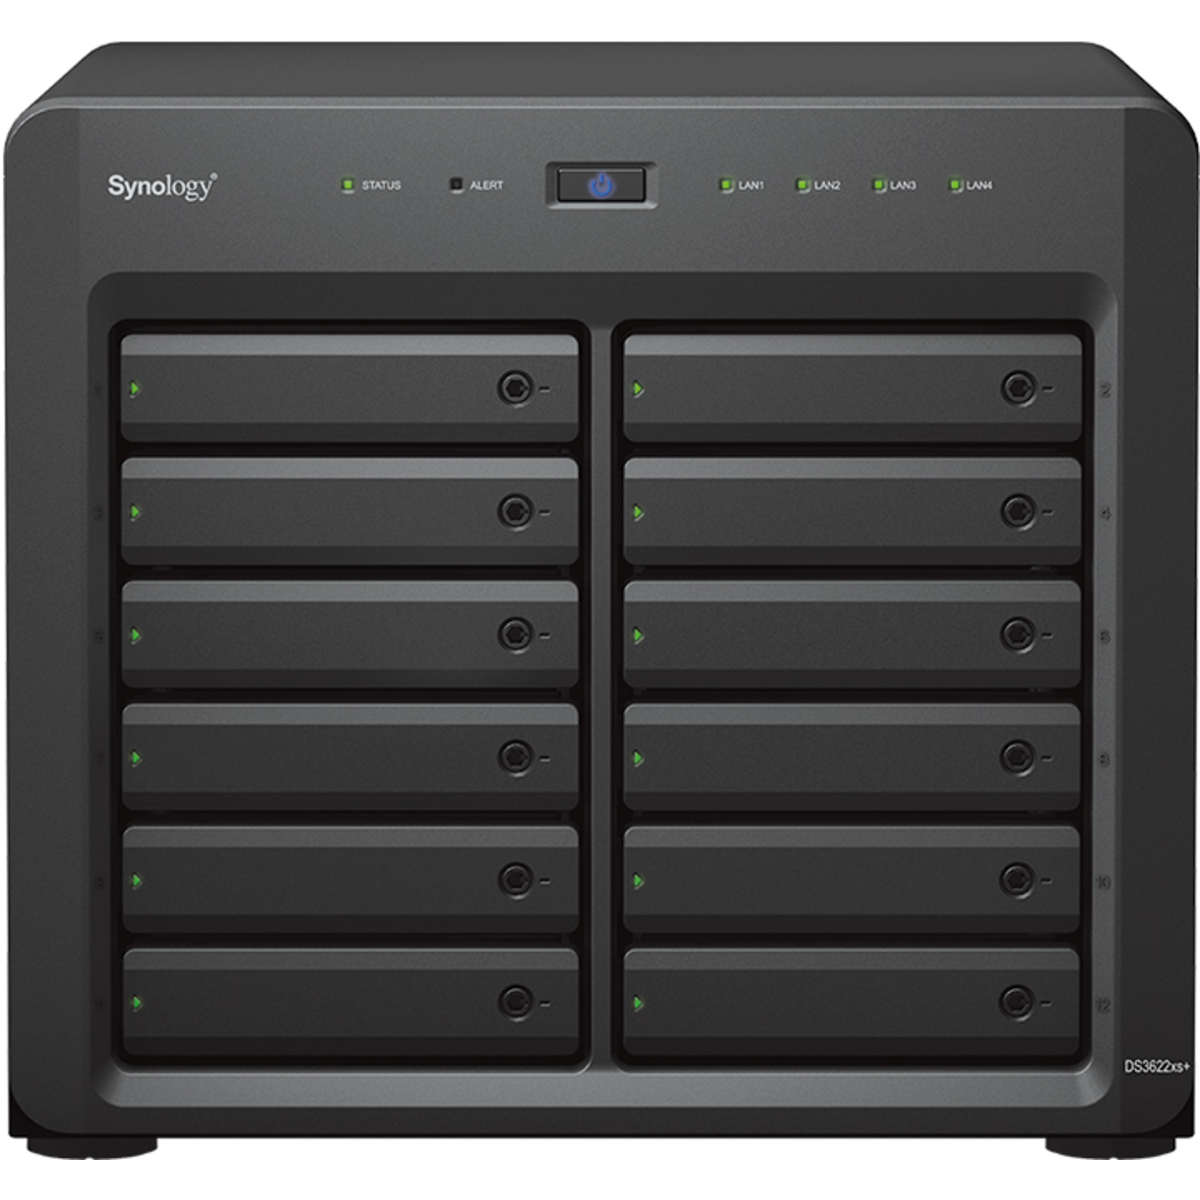 Synology DiskStation DS3622xs+ 44tb 12-Bay Desktop Multimedia / Power User / Business NAS - Network Attached Storage Device 11x4tb Western Digital Gold WD4003FRYZ 3.5 7200rpm SATA 6Gb/s HDD ENTERPRISE Class Drives Installed - Burn-In Tested DiskStation DS3622xs+